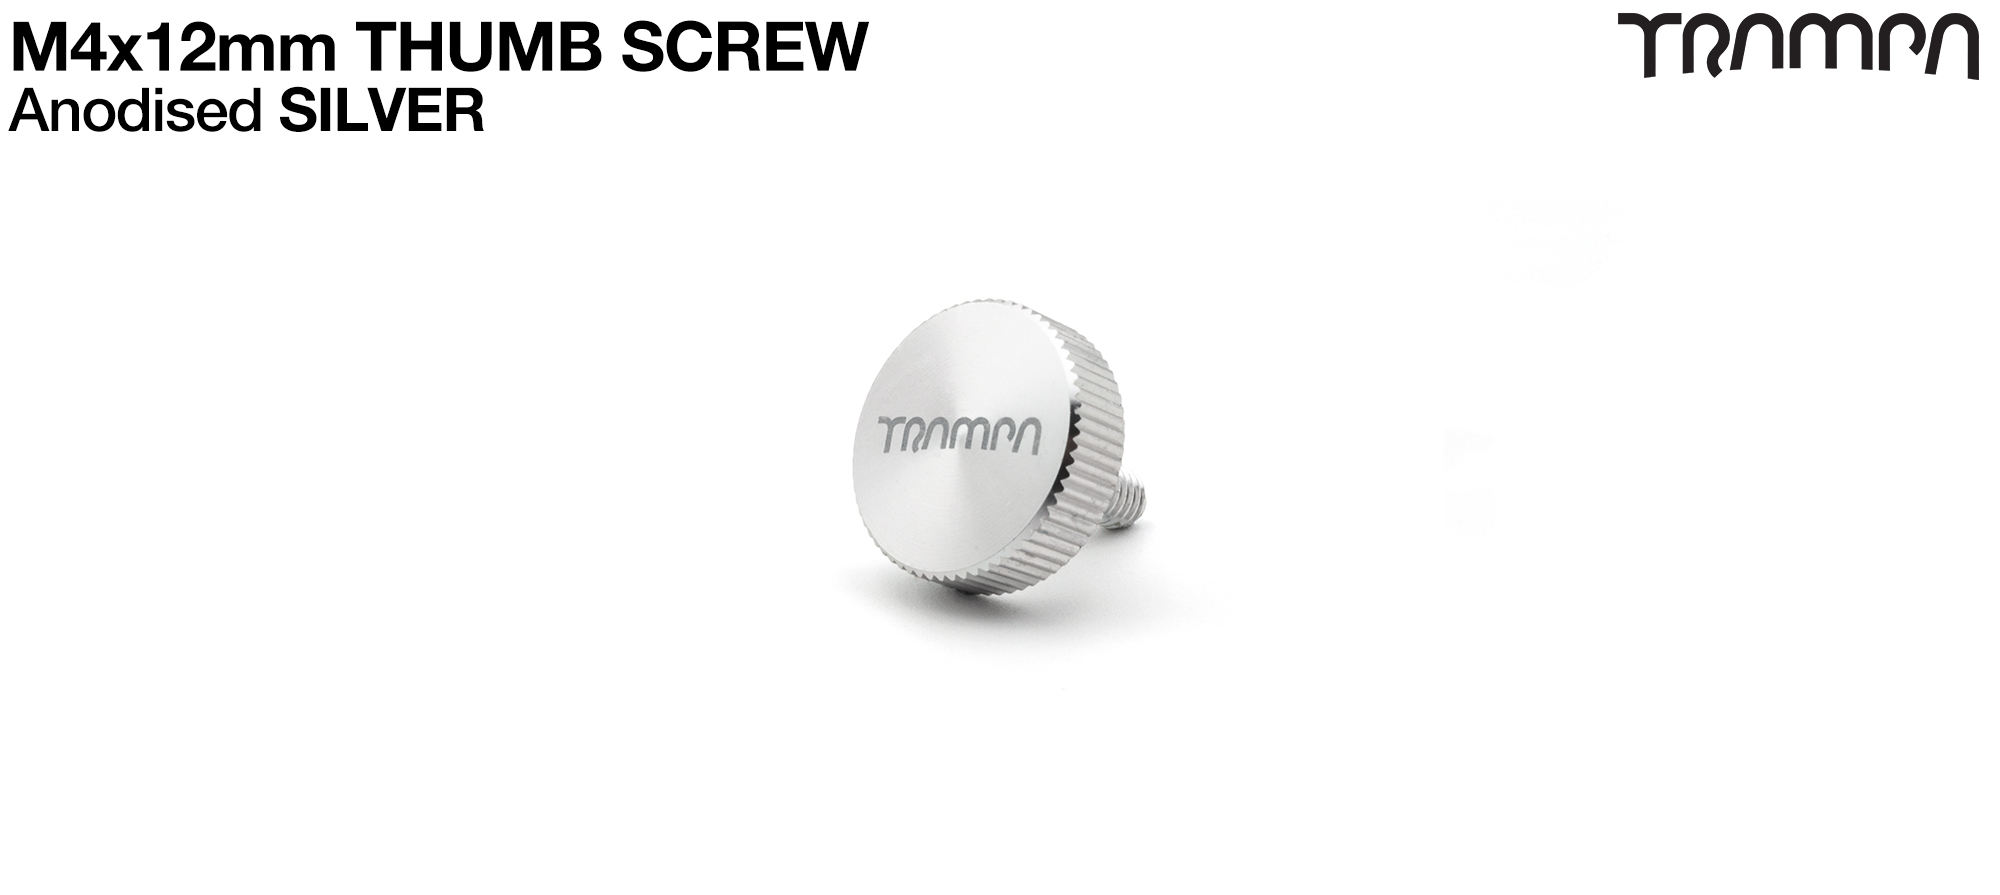 Inspection pit thumb Screw - SILVER 